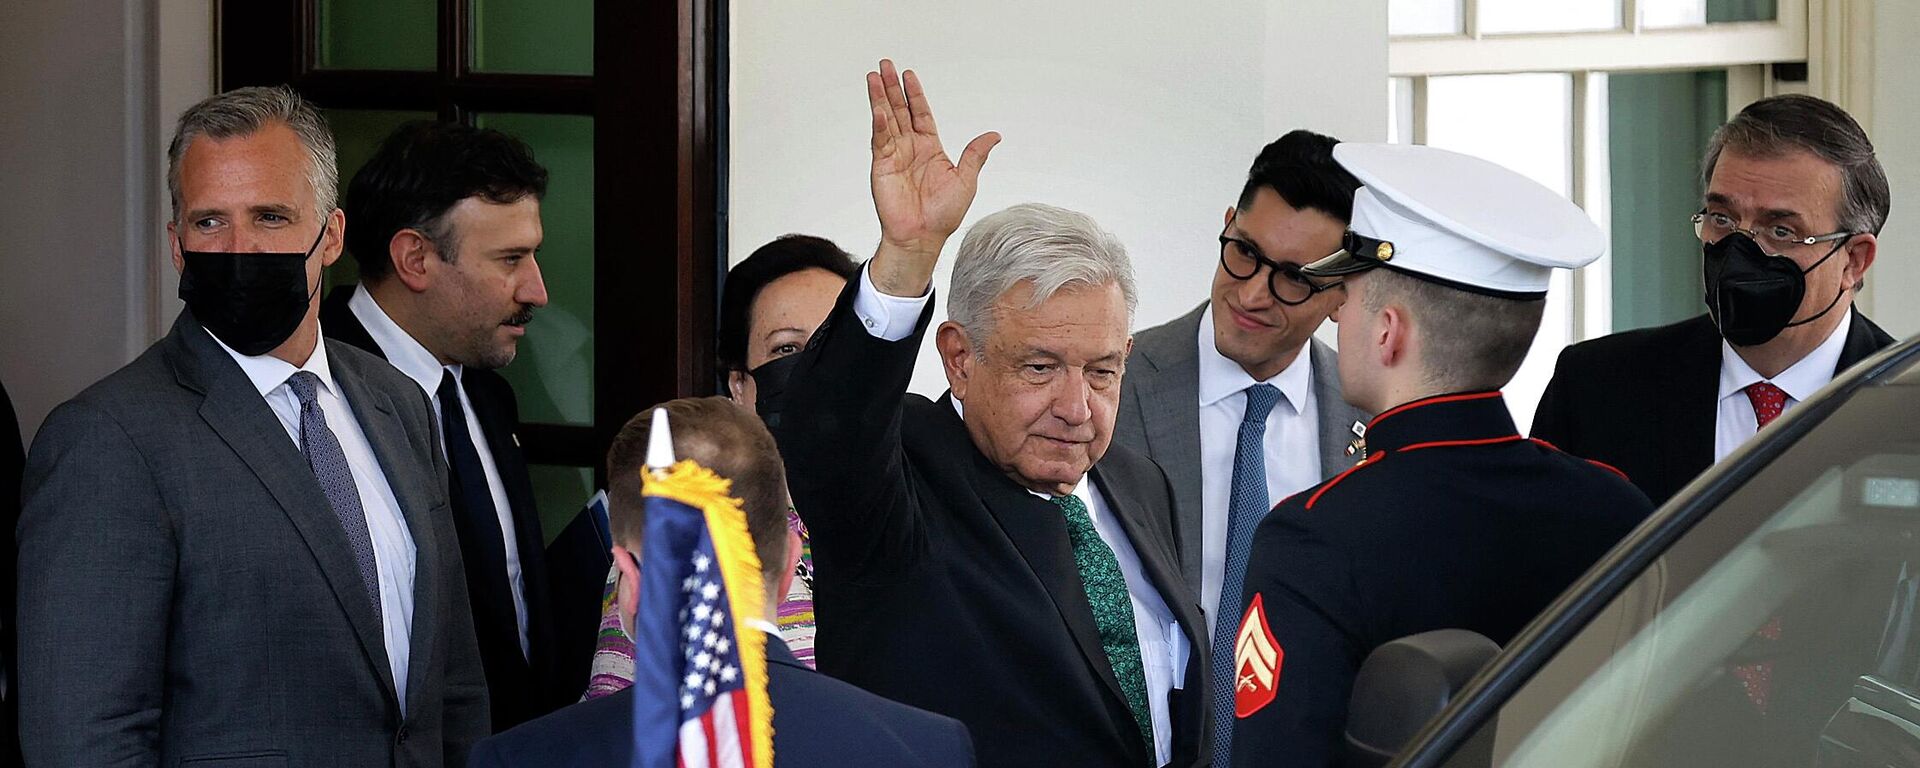 WASHINGTON, DC - JULY 12: Mexican President Andres Manuel Lopez Obrador waves to journalists as he departs the White House following a meeting with U.S. President Joe Biden on July 12, 2022 in Washington, DC.  - Sputnik International, 1920, 12.07.2022